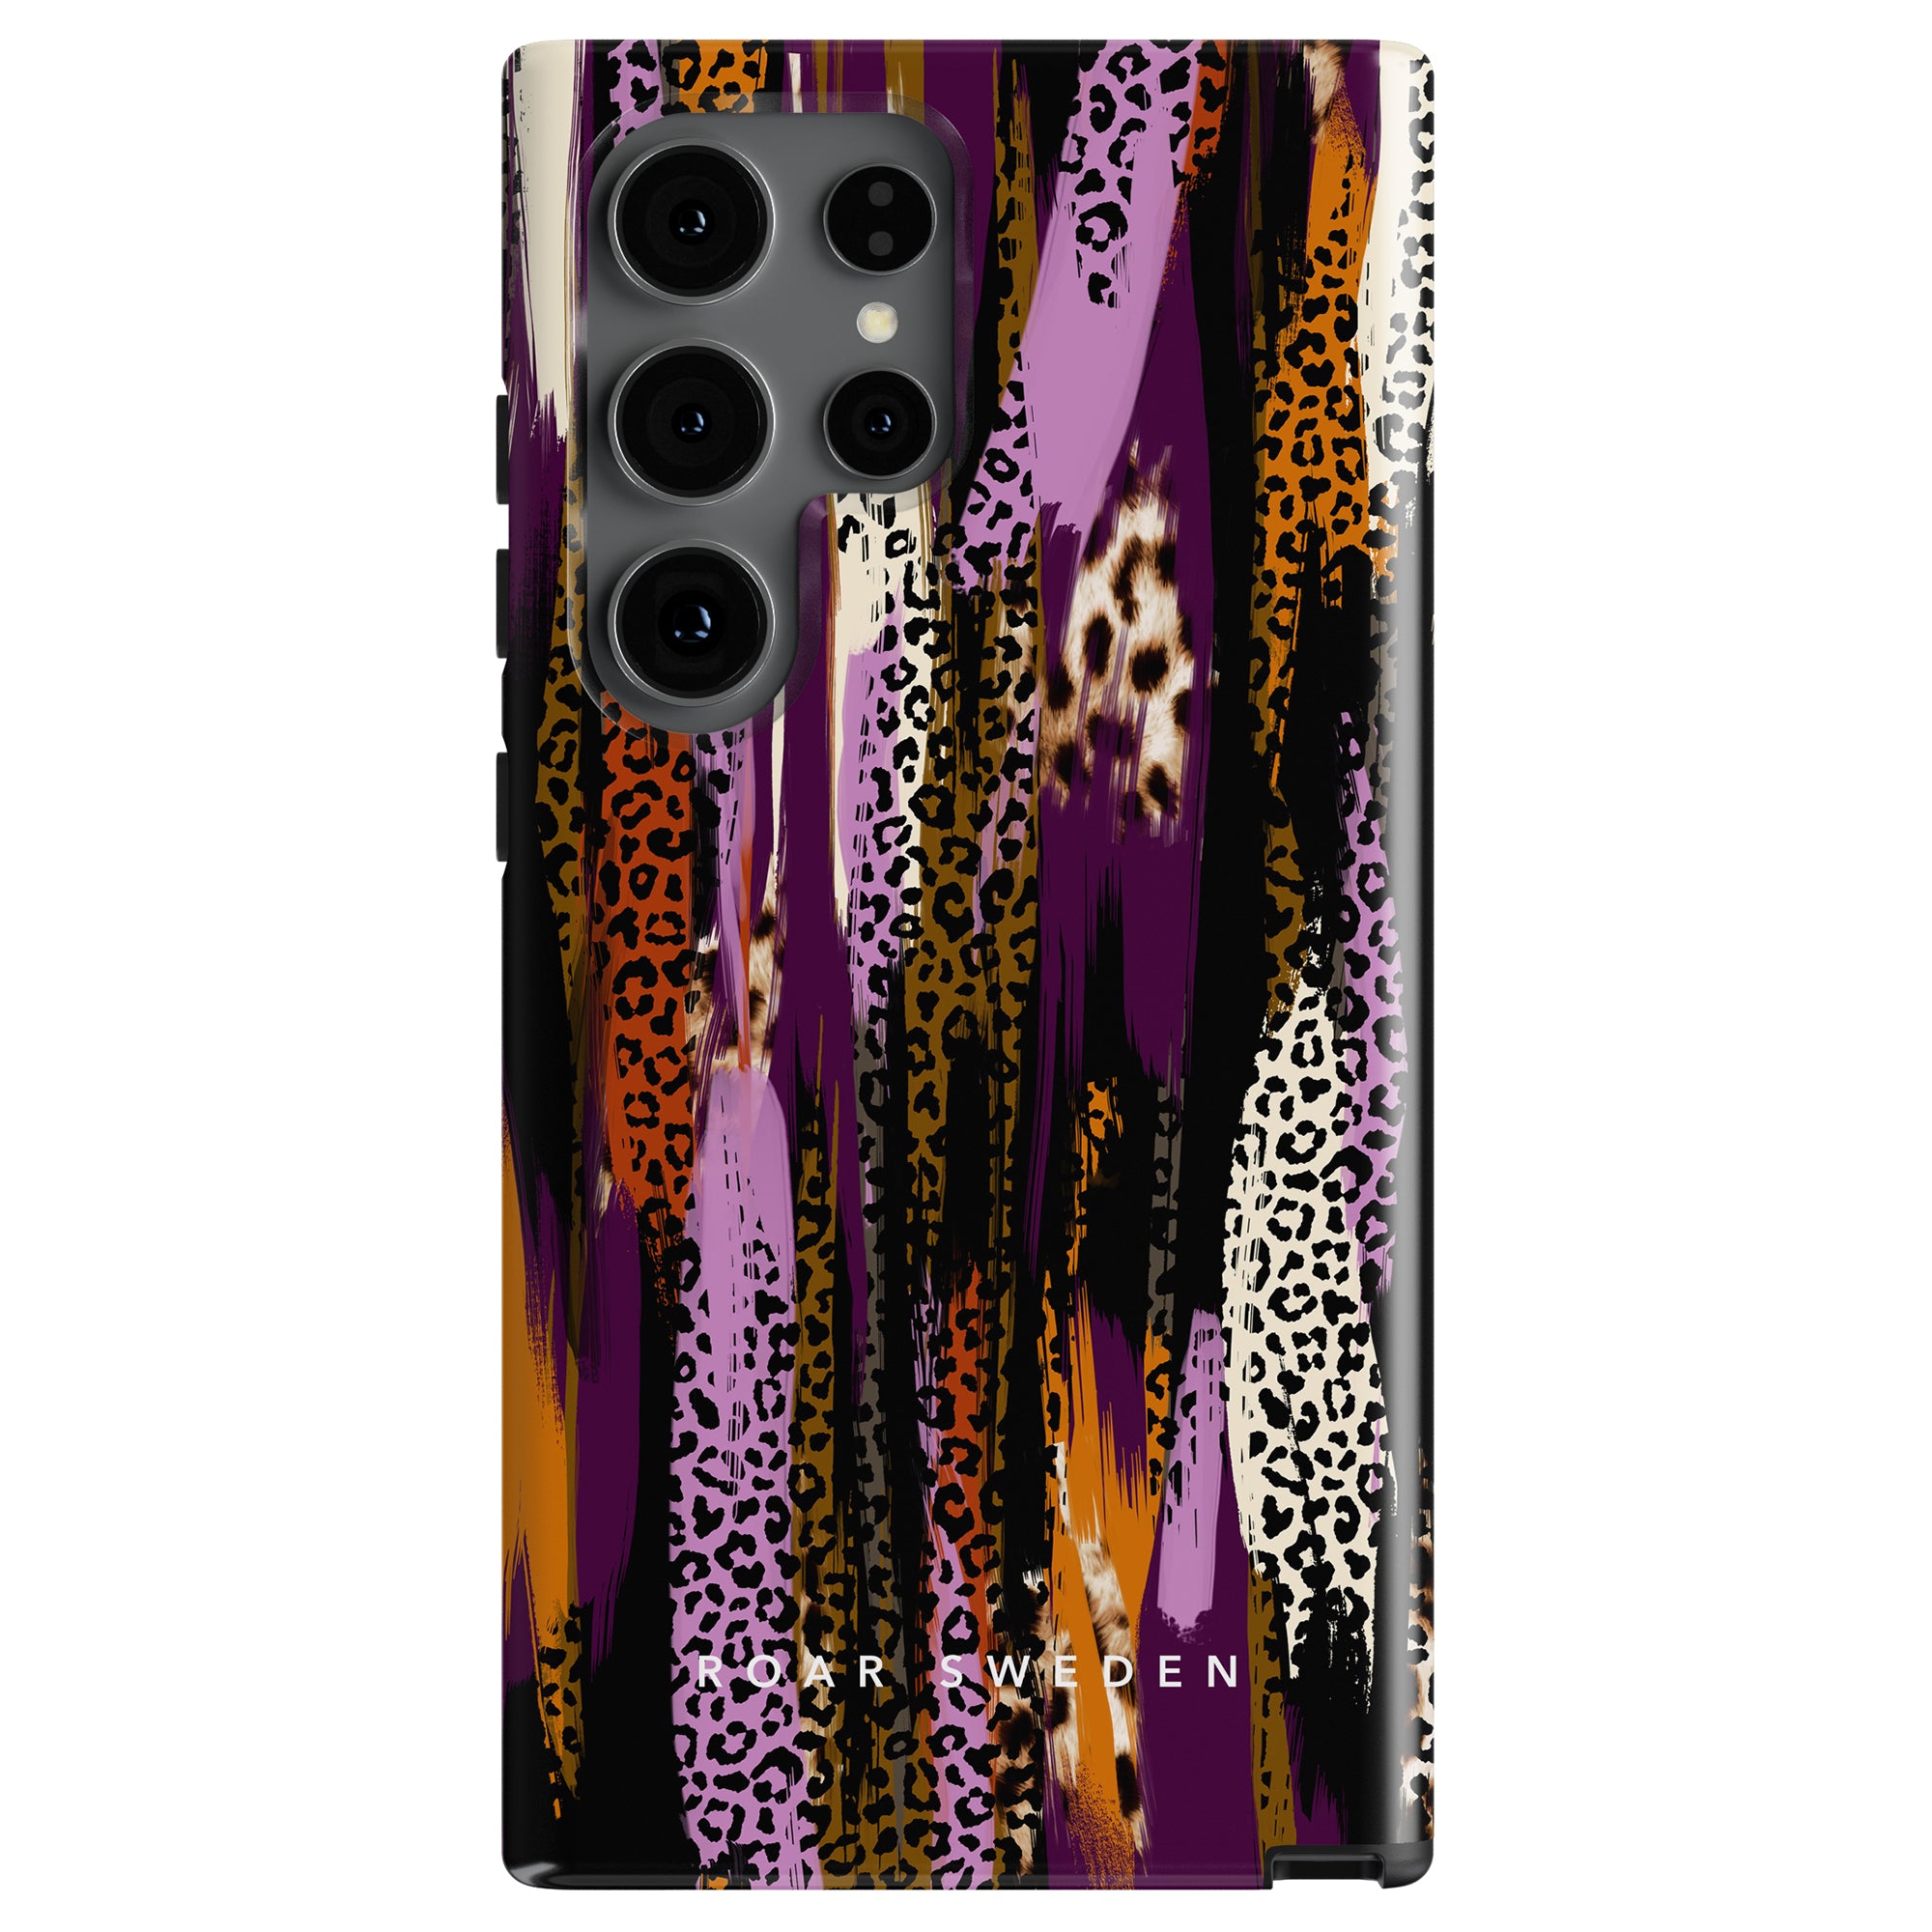 A smartphone case with a vibrant design of vertical streaks in purple, black, and orange, paired with leopard print sections. The text "Ideal of Sweden" is at the bottom. This **Artsy Leo - Tough Case** offers excellent skydd för din smartphone while showcasing your unique style.